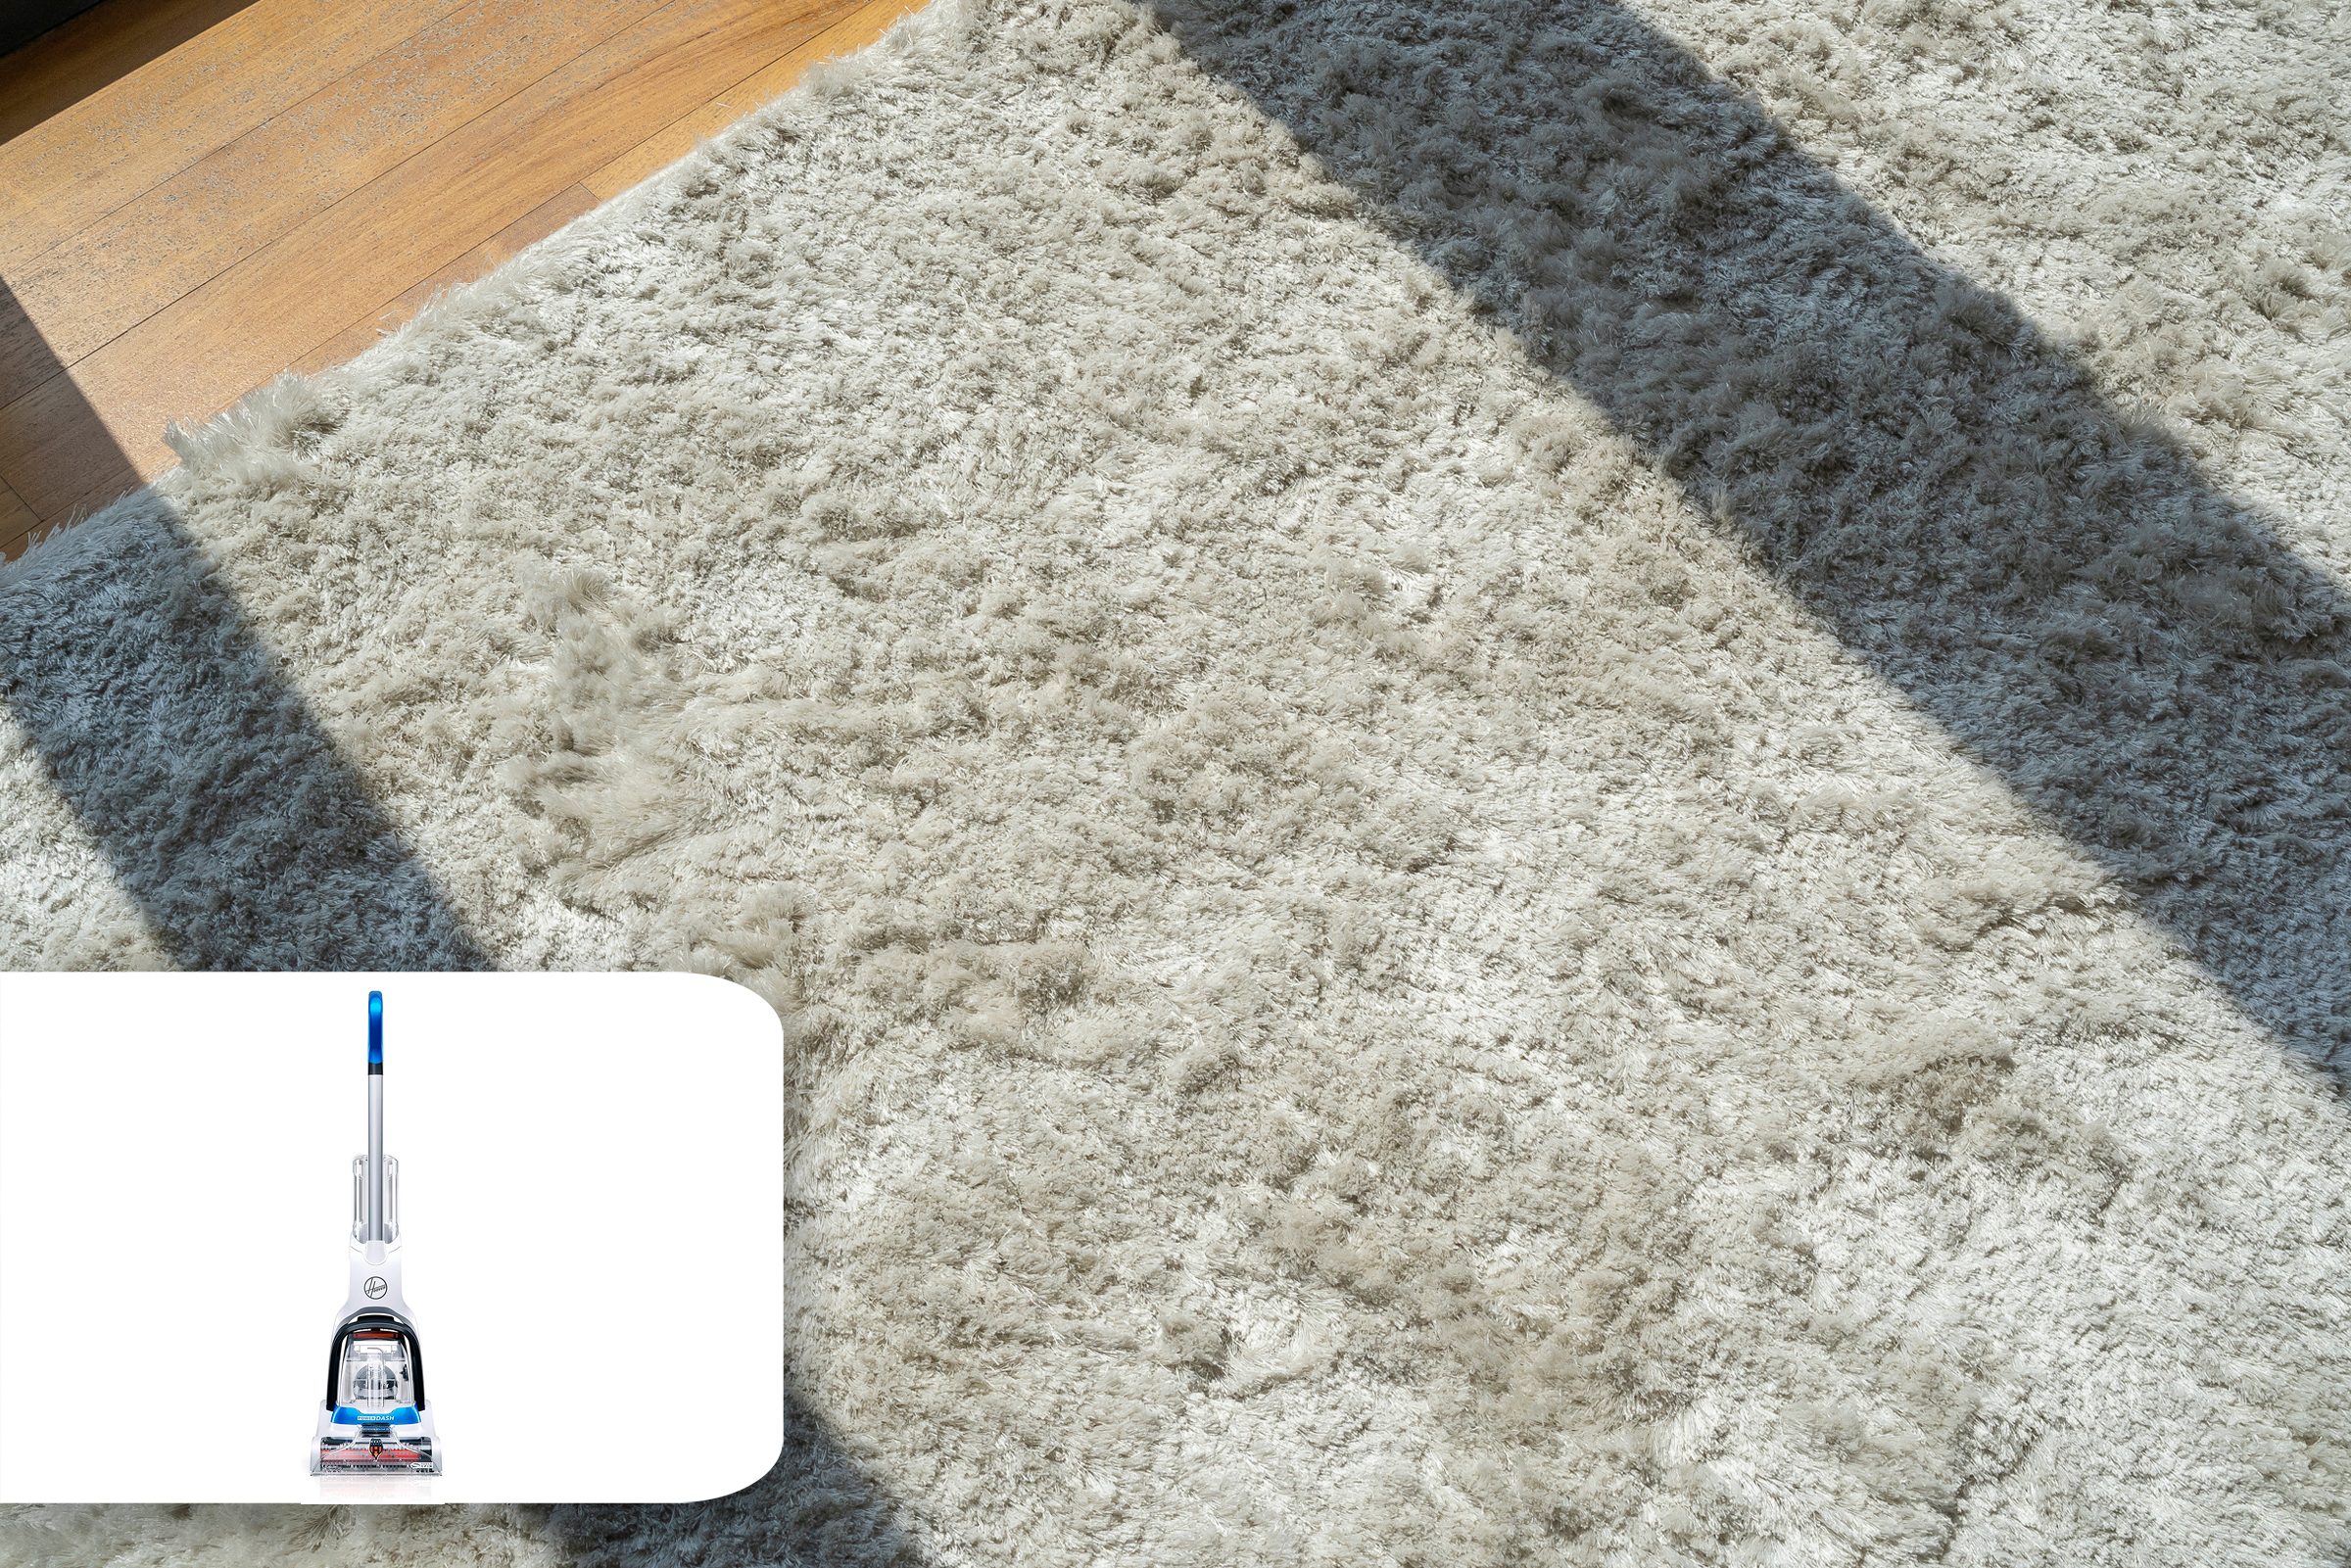 carpet cleaning fall cleaning